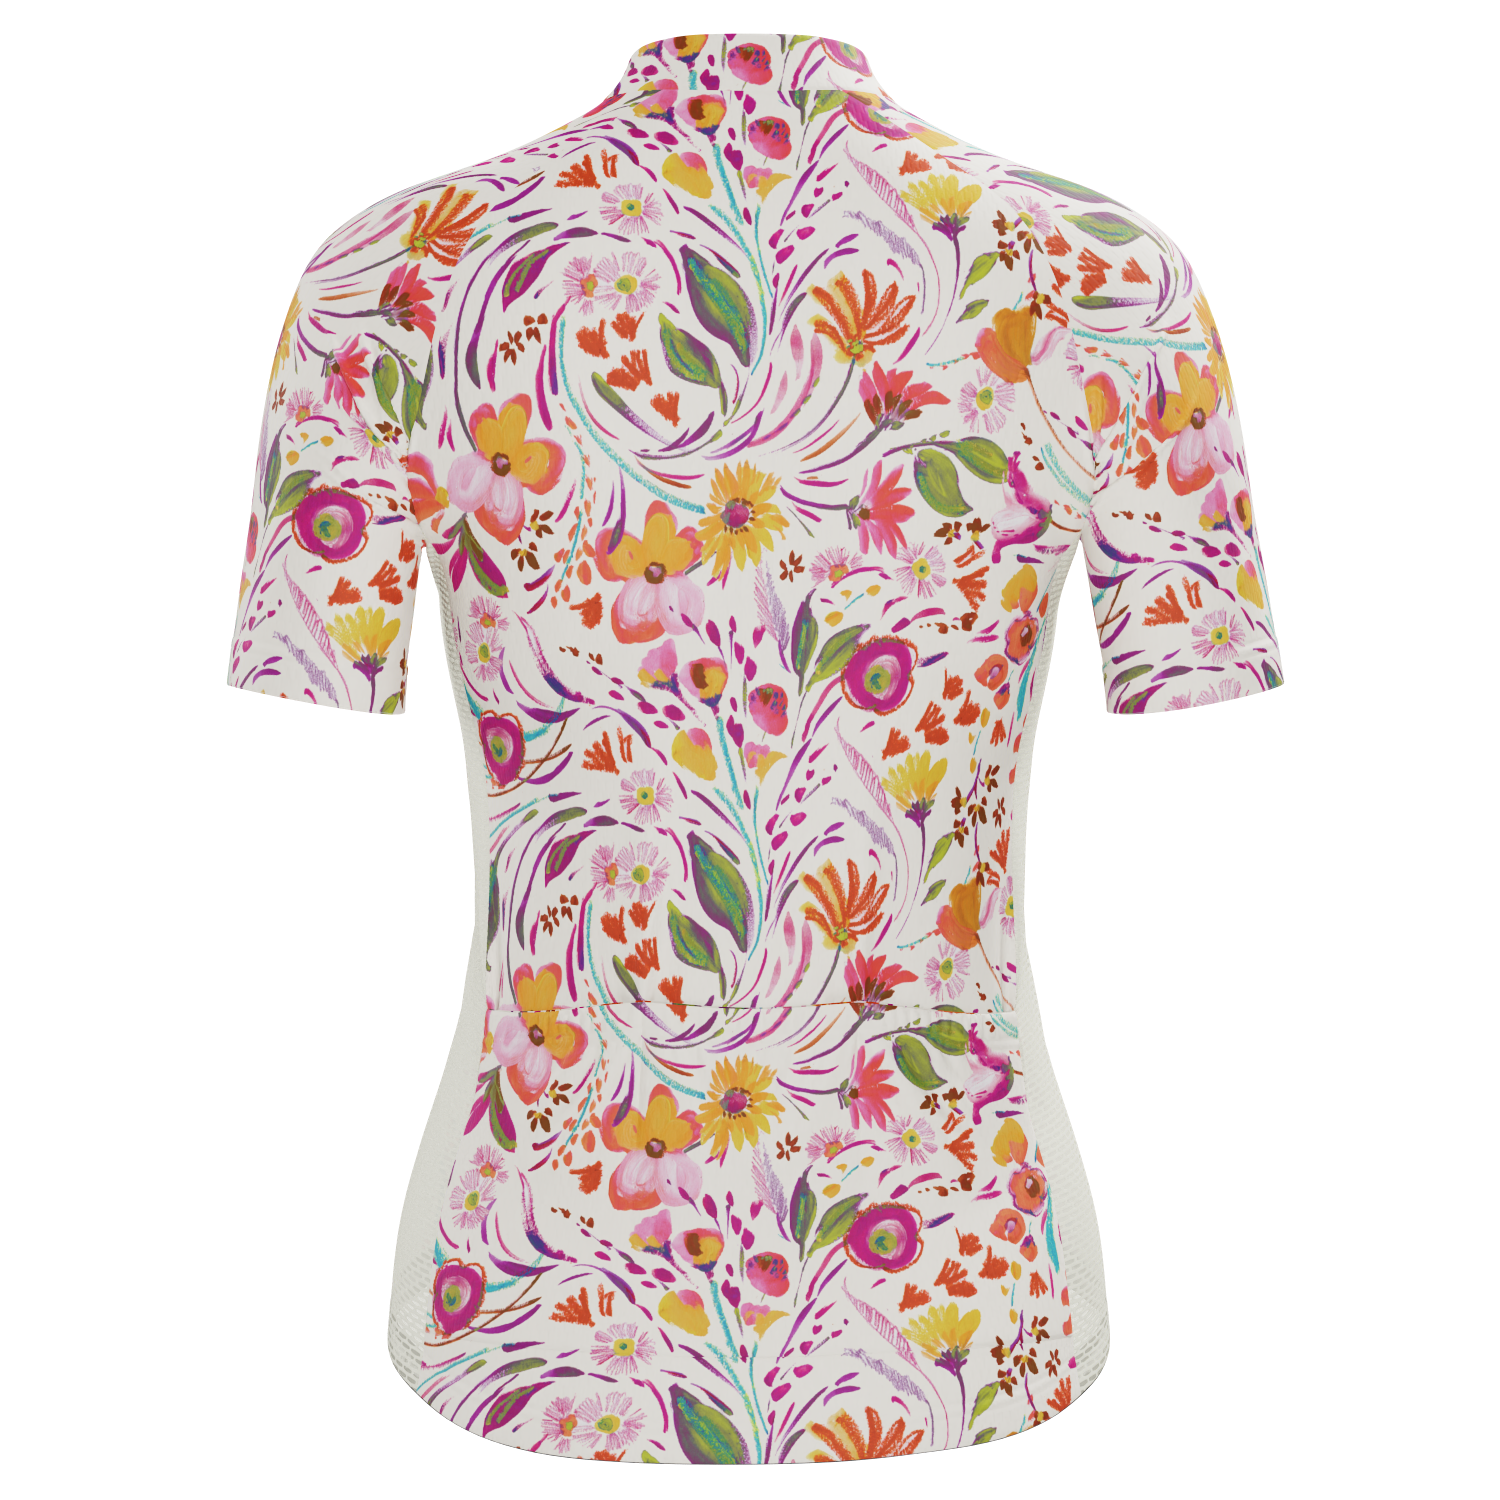 Women's Painterly Blooms Short Sleeve Cycling Jersey